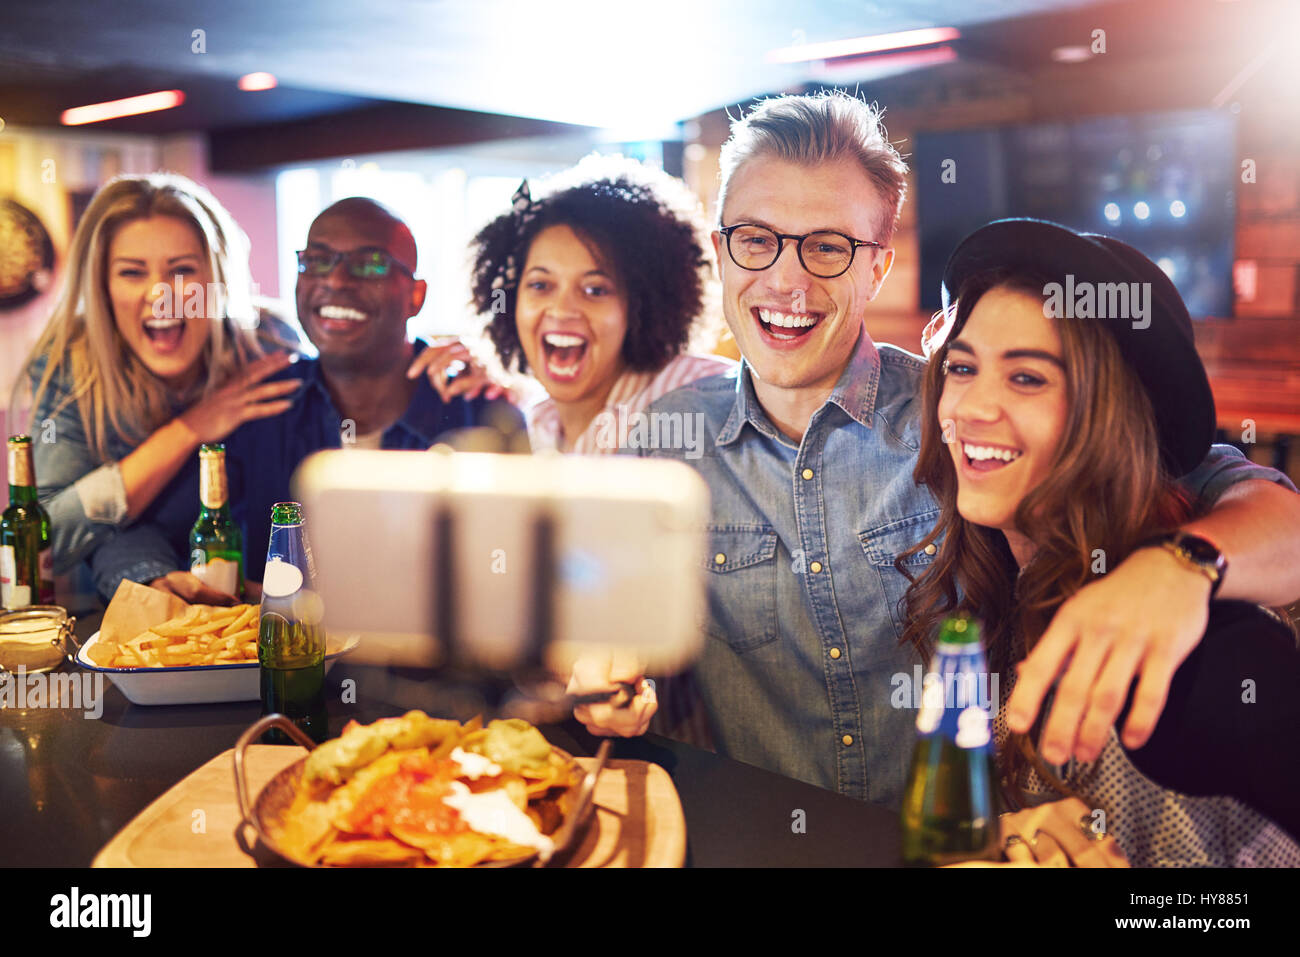 A group of best friends smiling and laughing while taking a selfie in the bar. Stock Photo